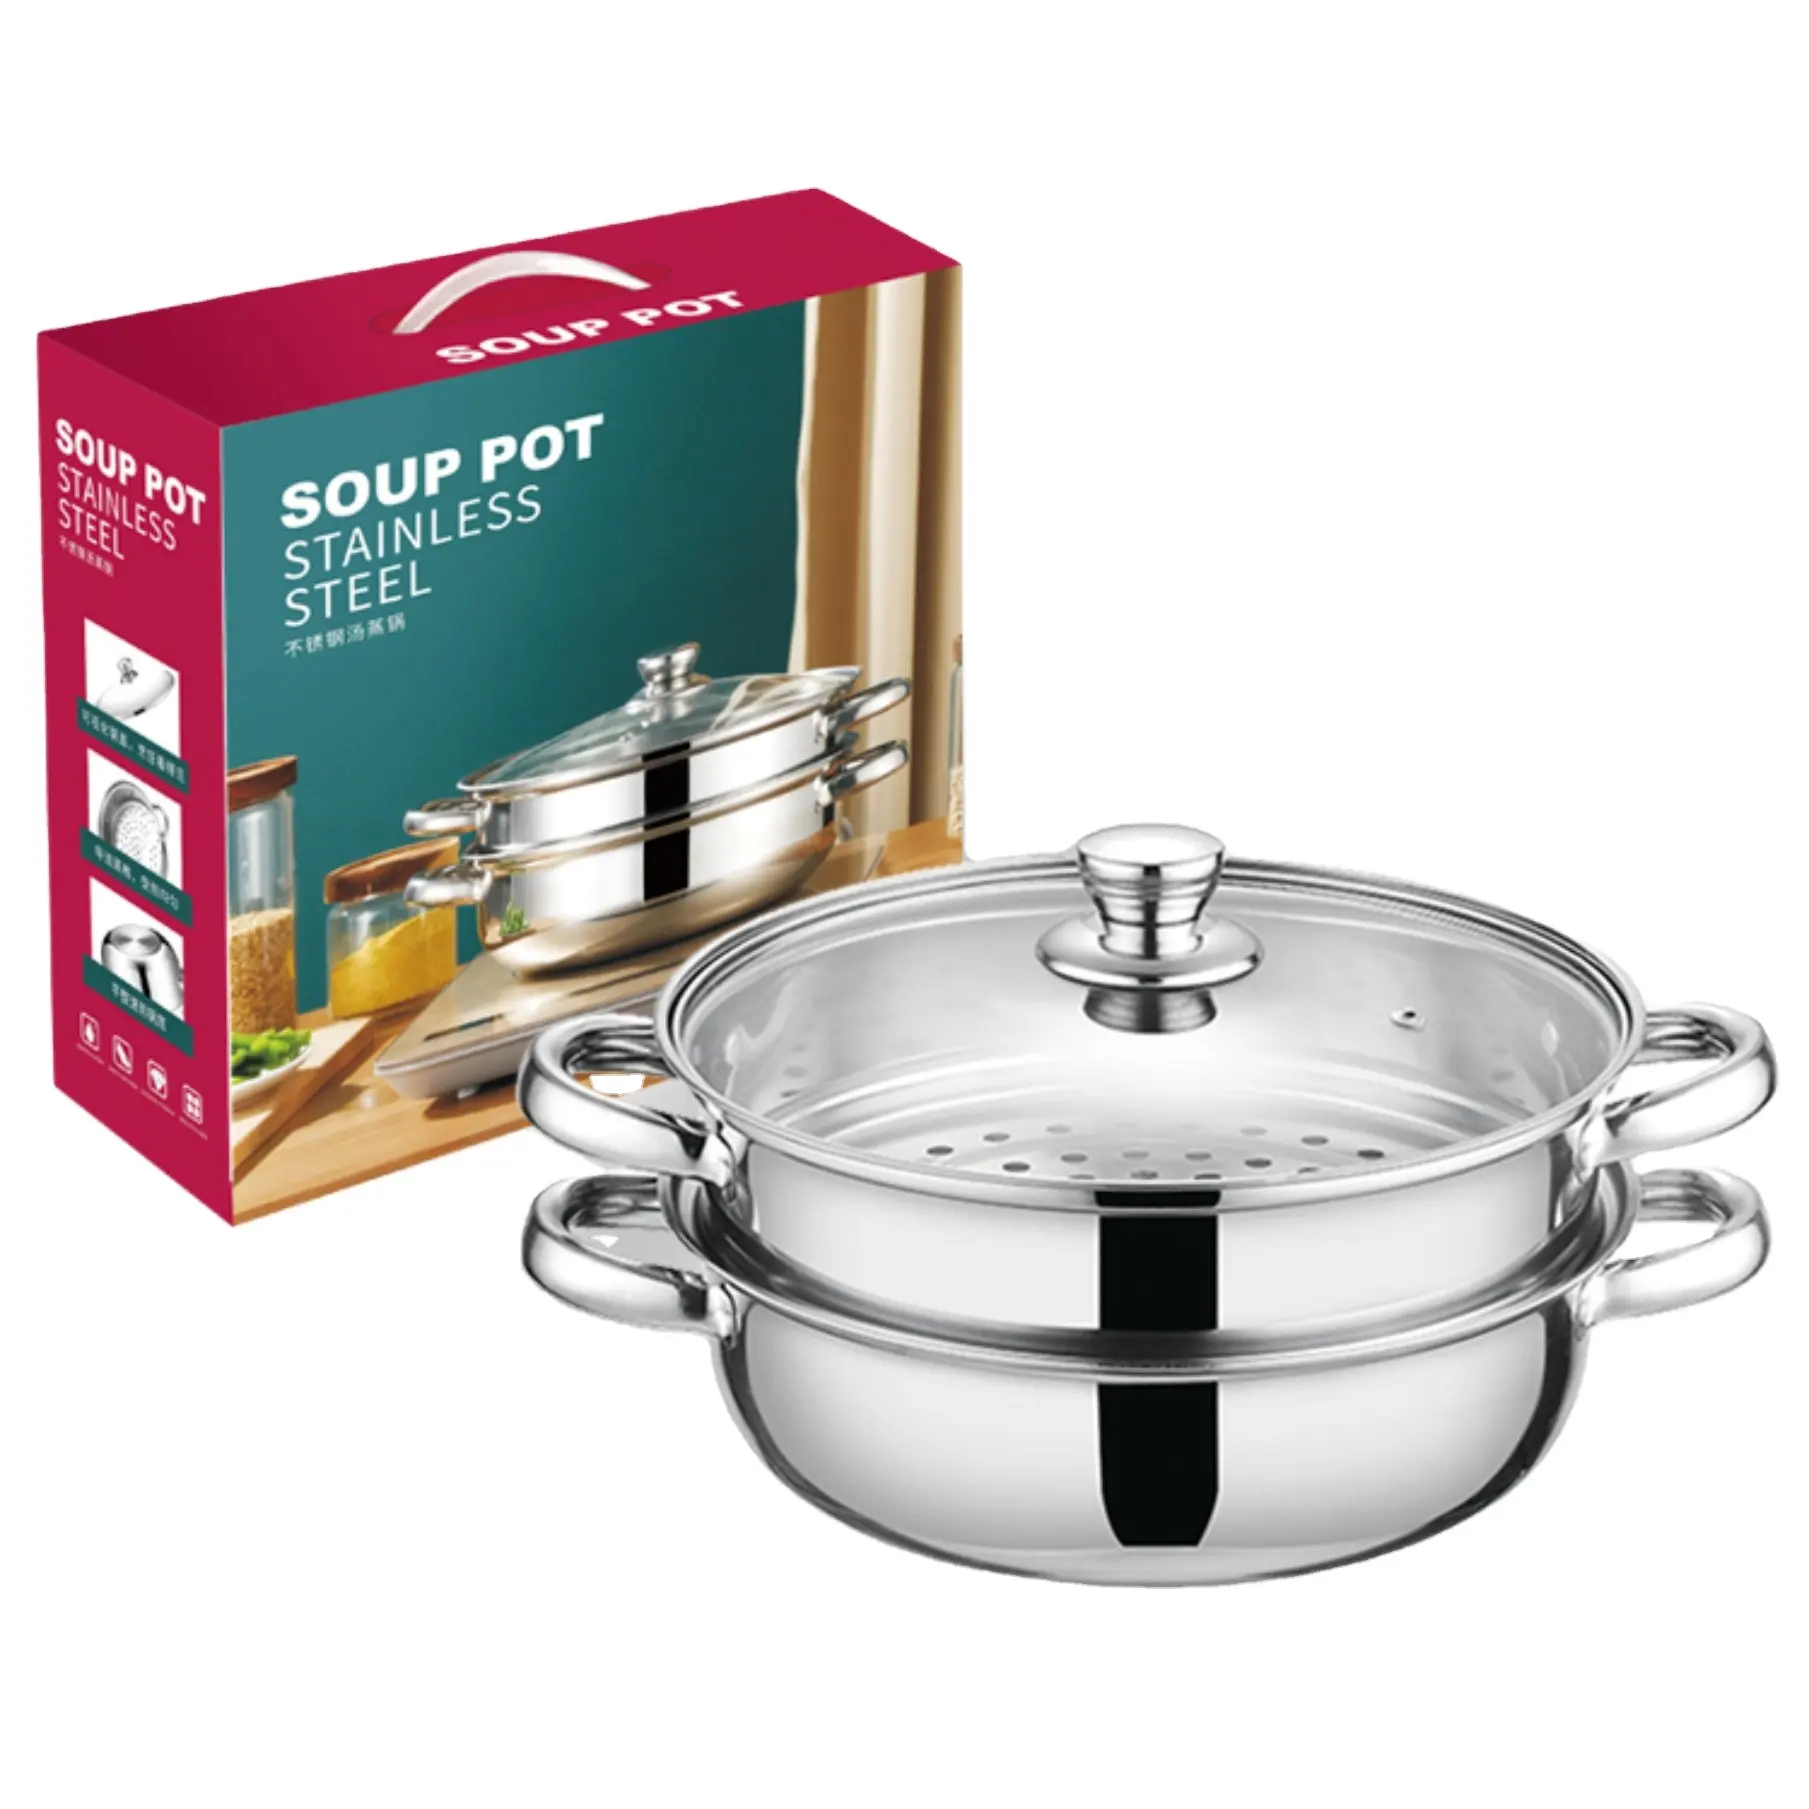 Hot selling stainless steel cookware with glass lid stainless steel cooking pot set